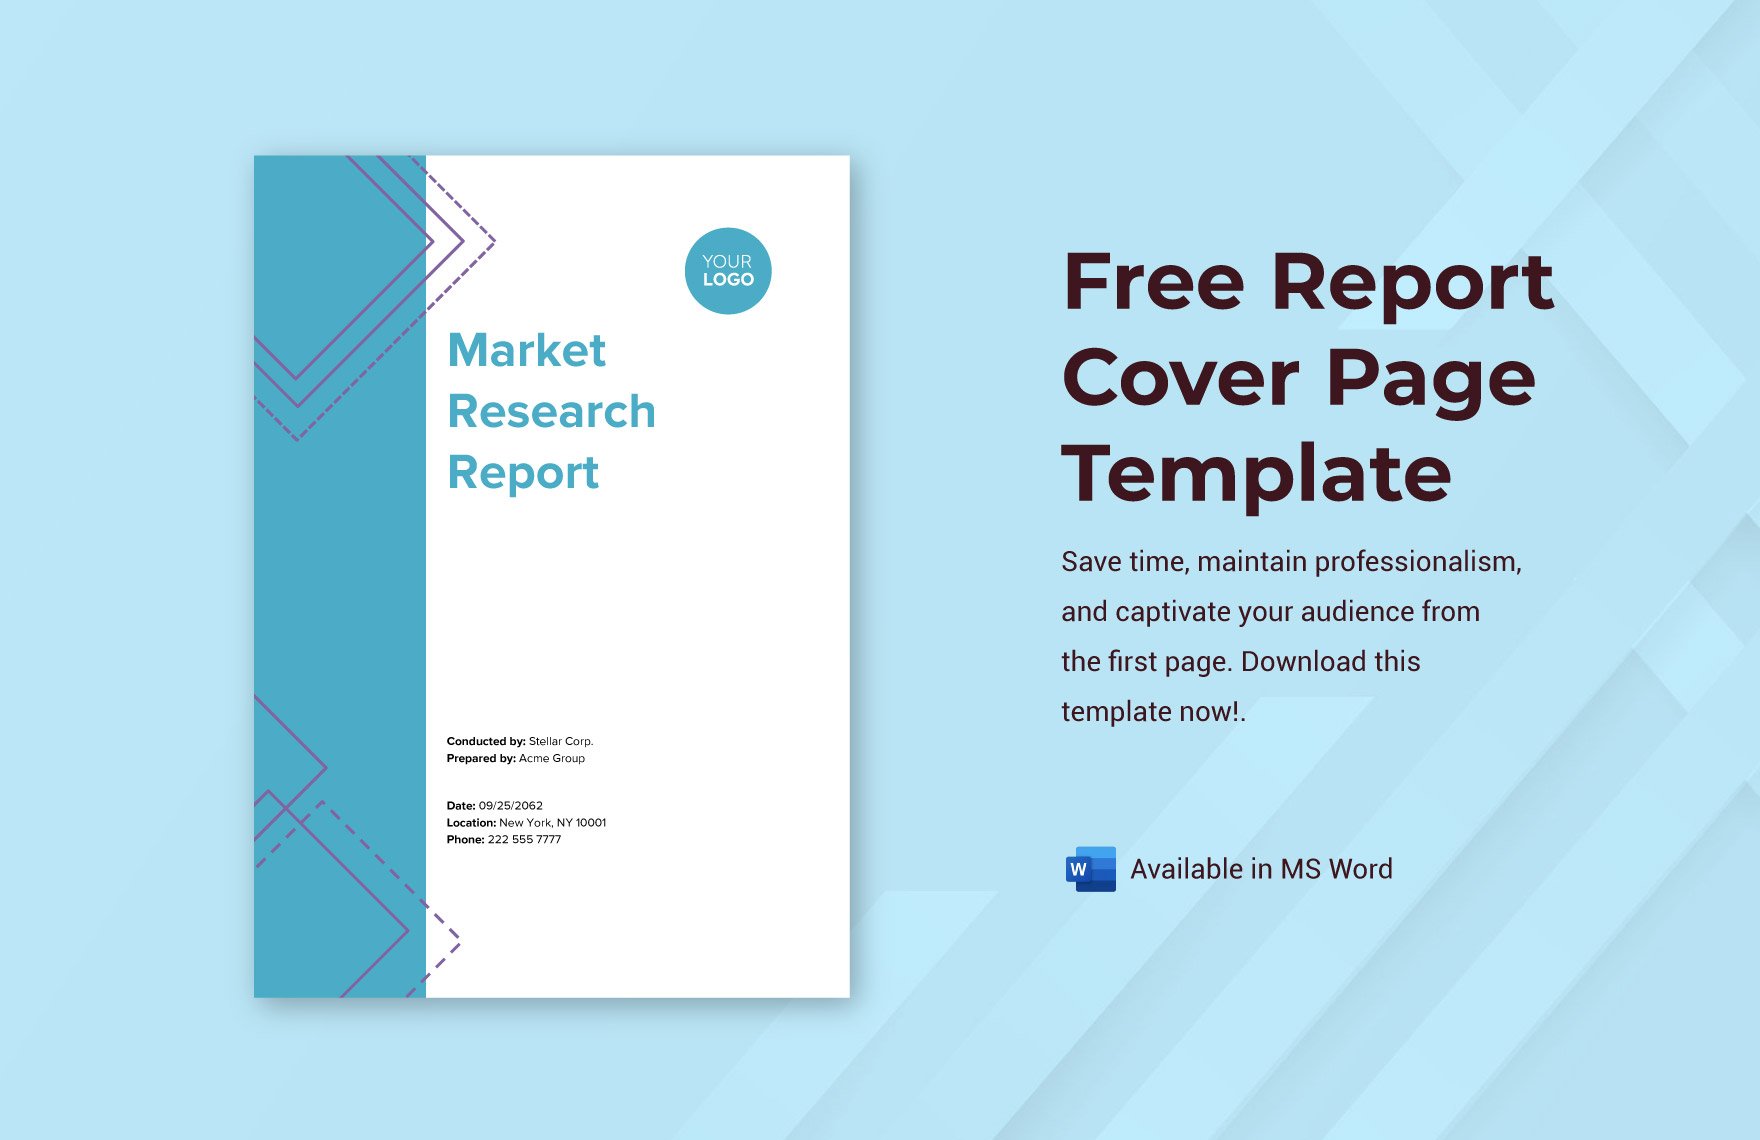 Free Report Cover Page Template - Download in Word | Template.net